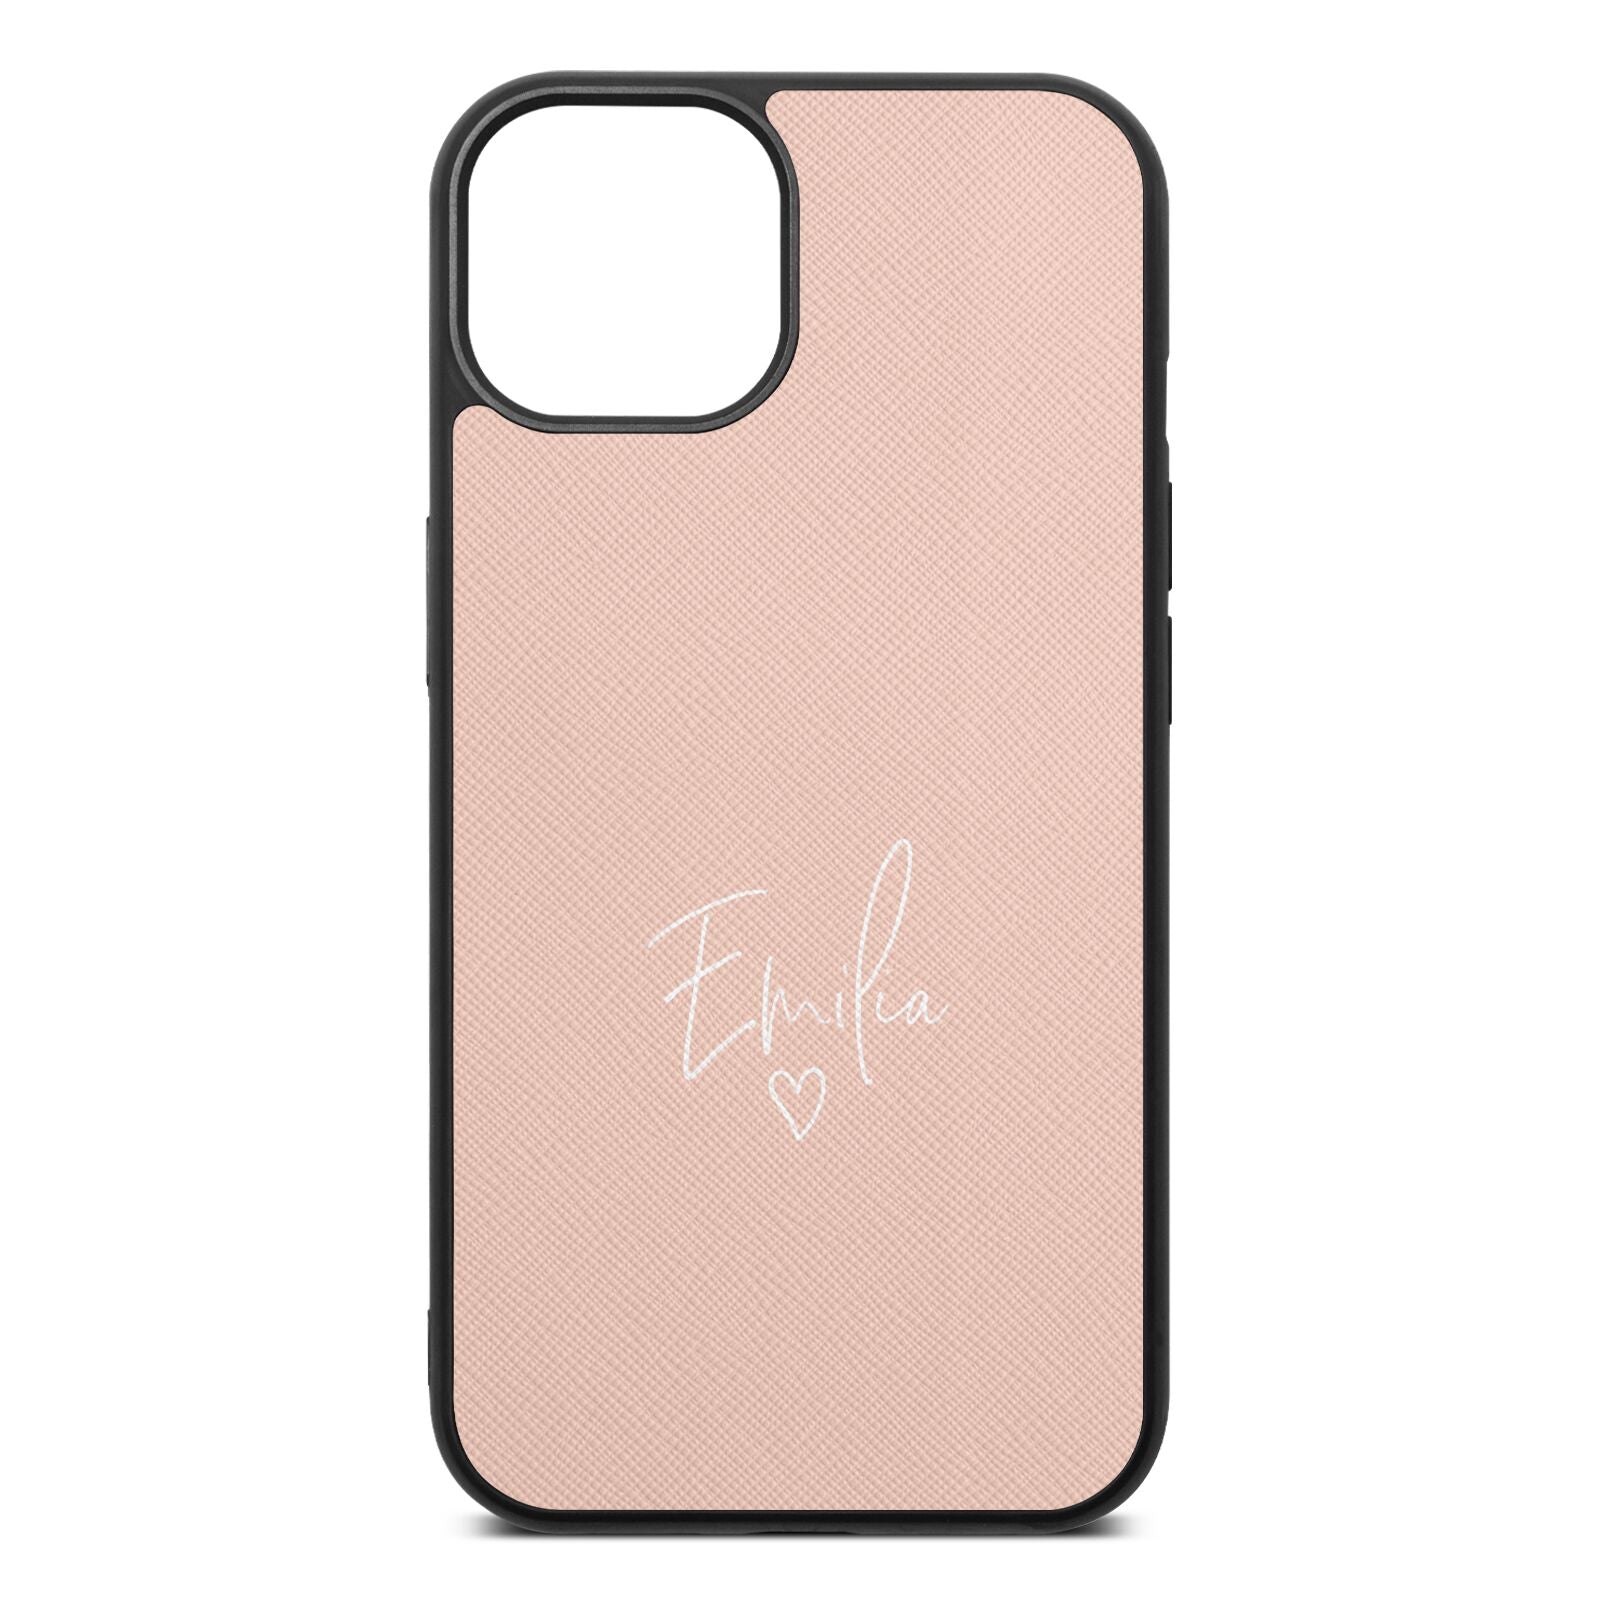 White Handwritten Name Transparent Nude Saffiano Leather iPhone 13 Case